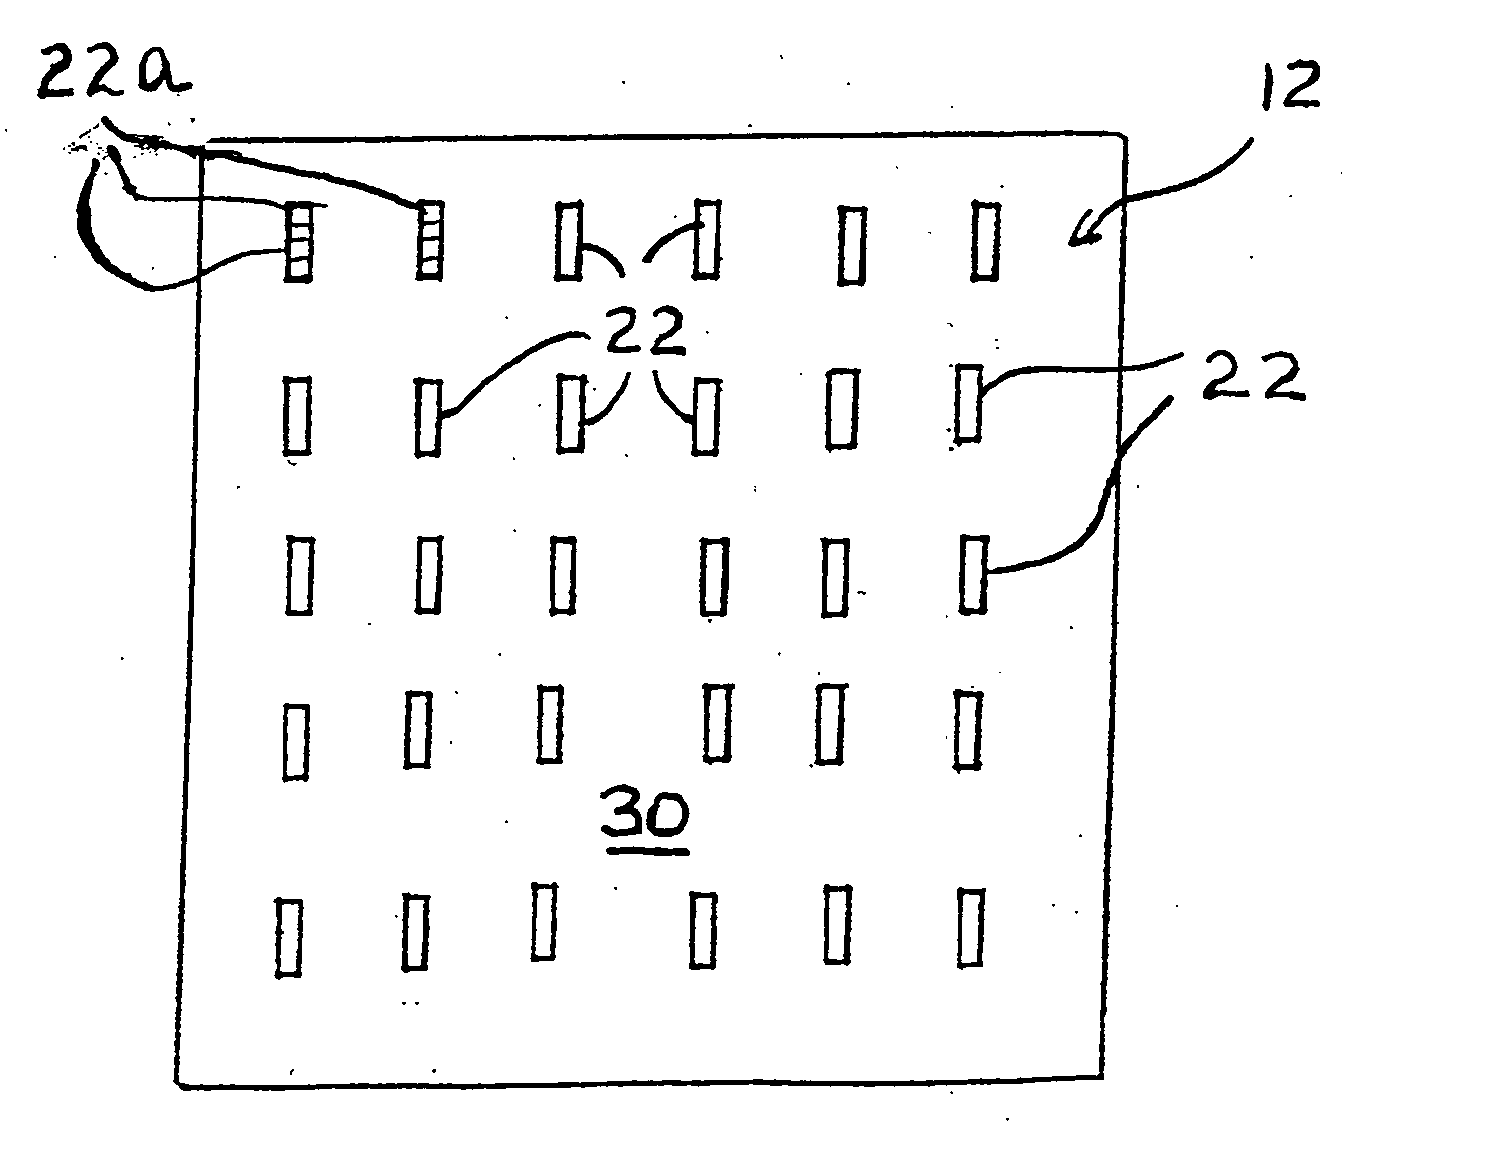 Configurable arrays for steerable antennas and wireless network incorporating the steerable antennas